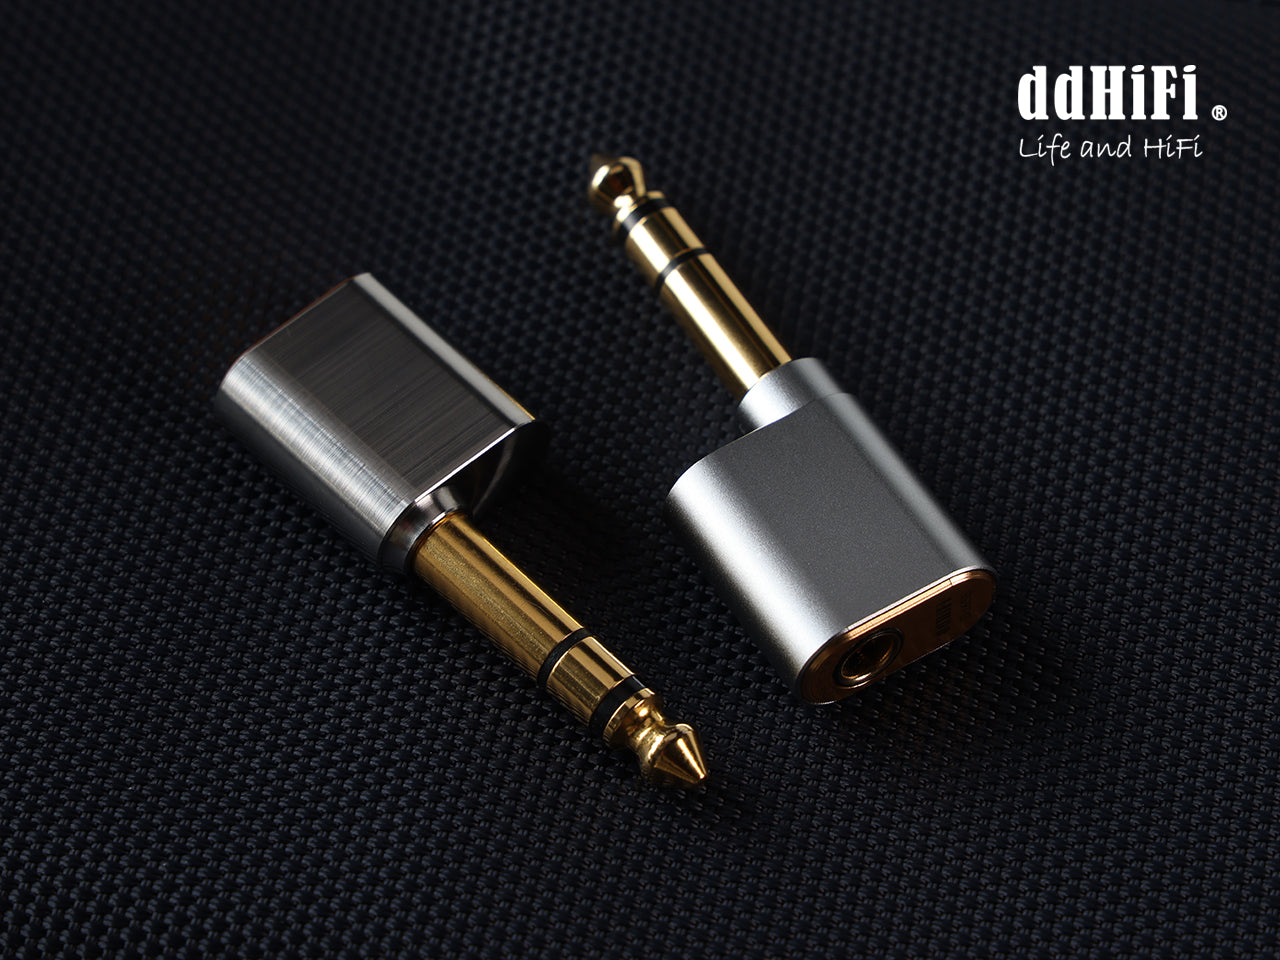 ddHifi DJ65A DJ65B DJ65B(AL) DD HIFI 6.3mm to 3.5mm Female Adapter / 6.3mm to 4.4mm Female Adapter